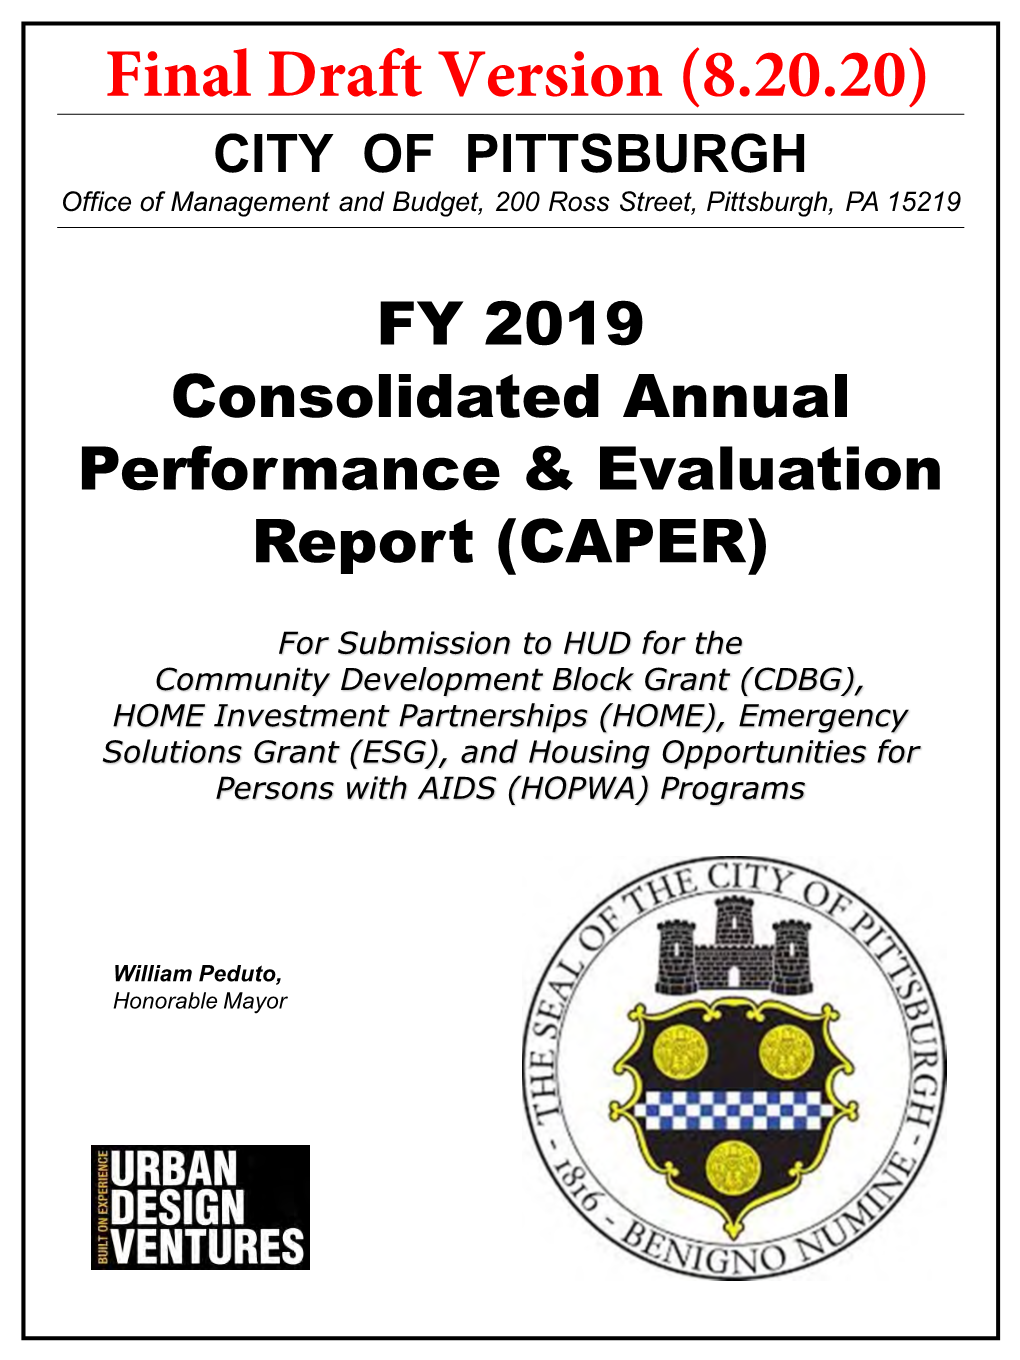 FY 2019 CAPER City of Pittsburgh, PA